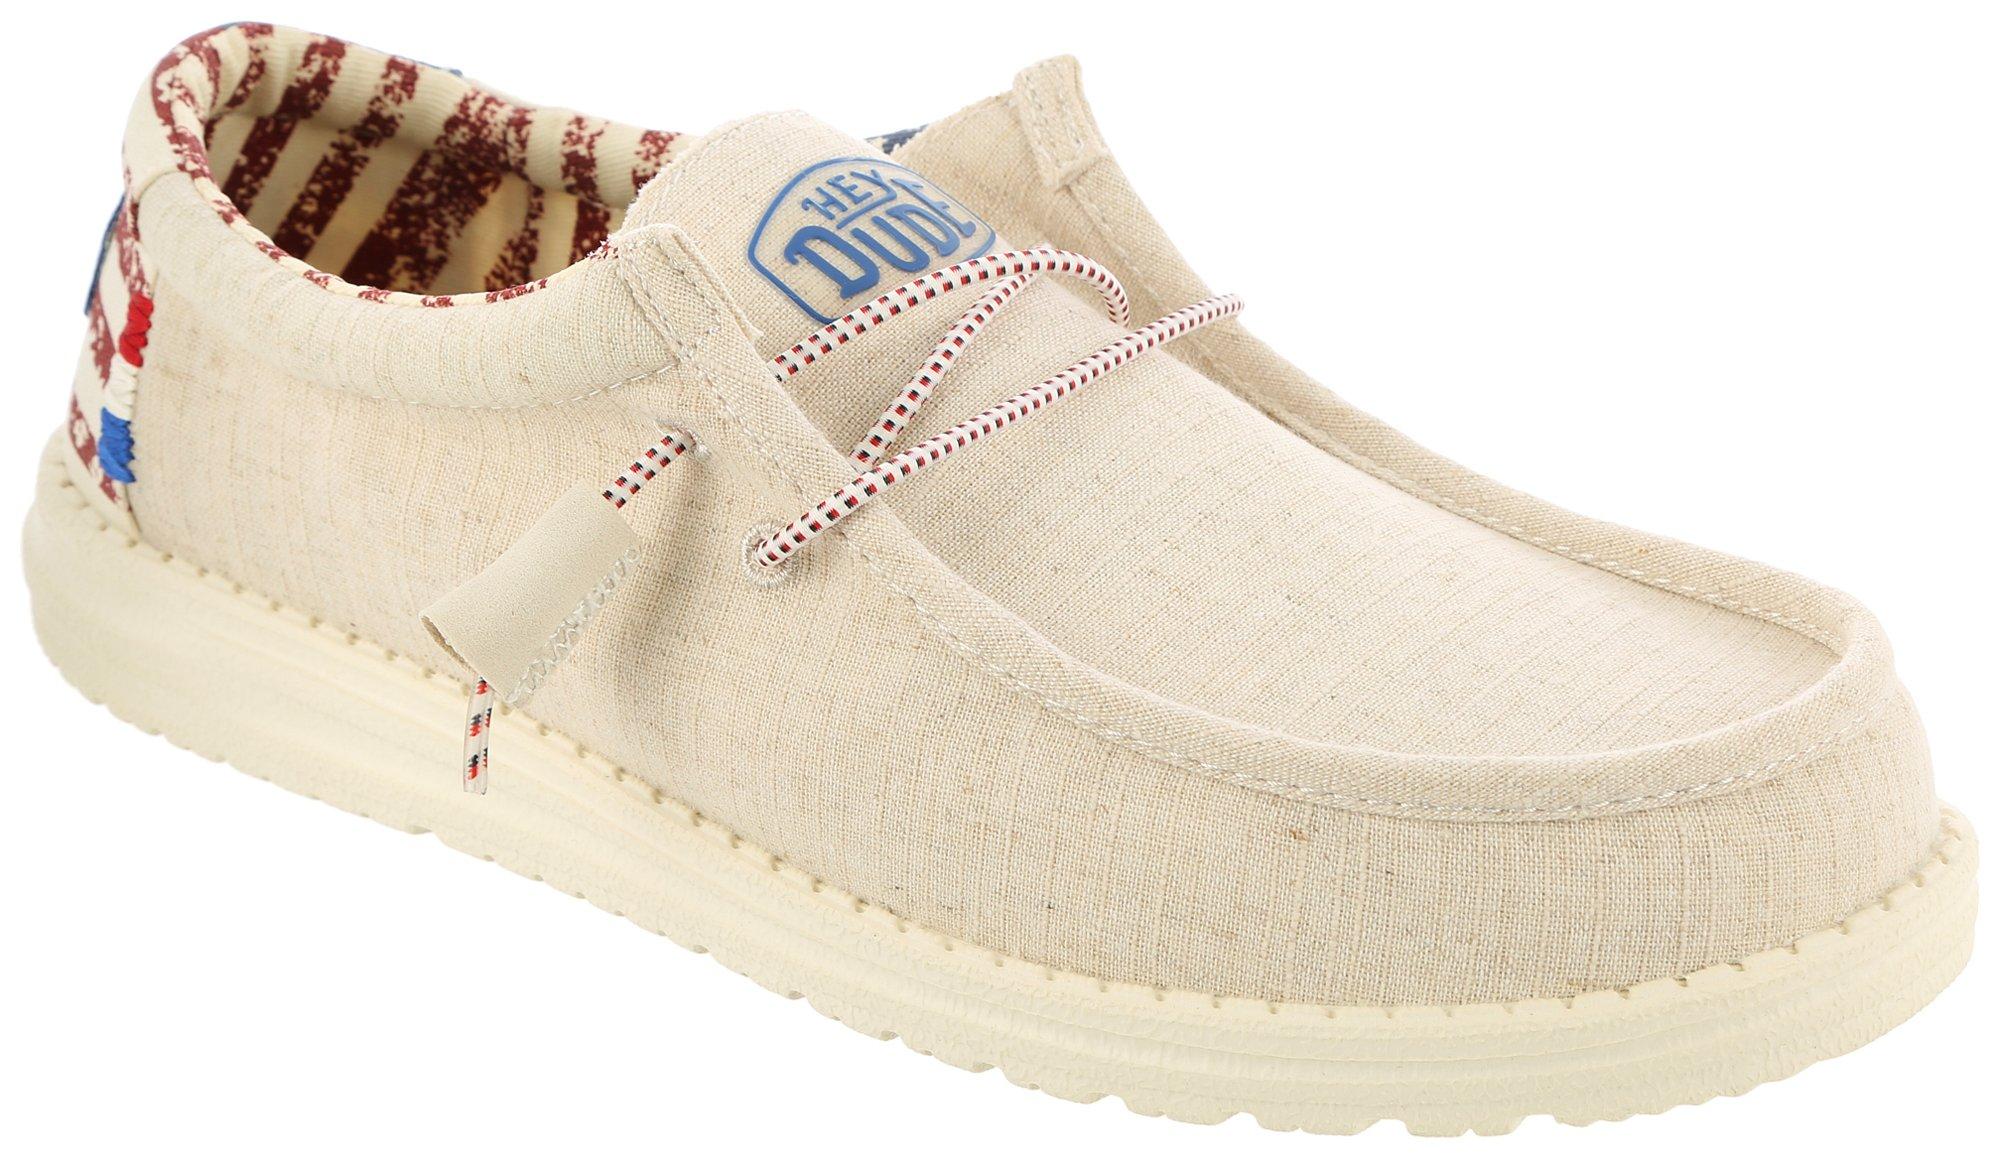 Hey Dude Wally Canvas Shoes